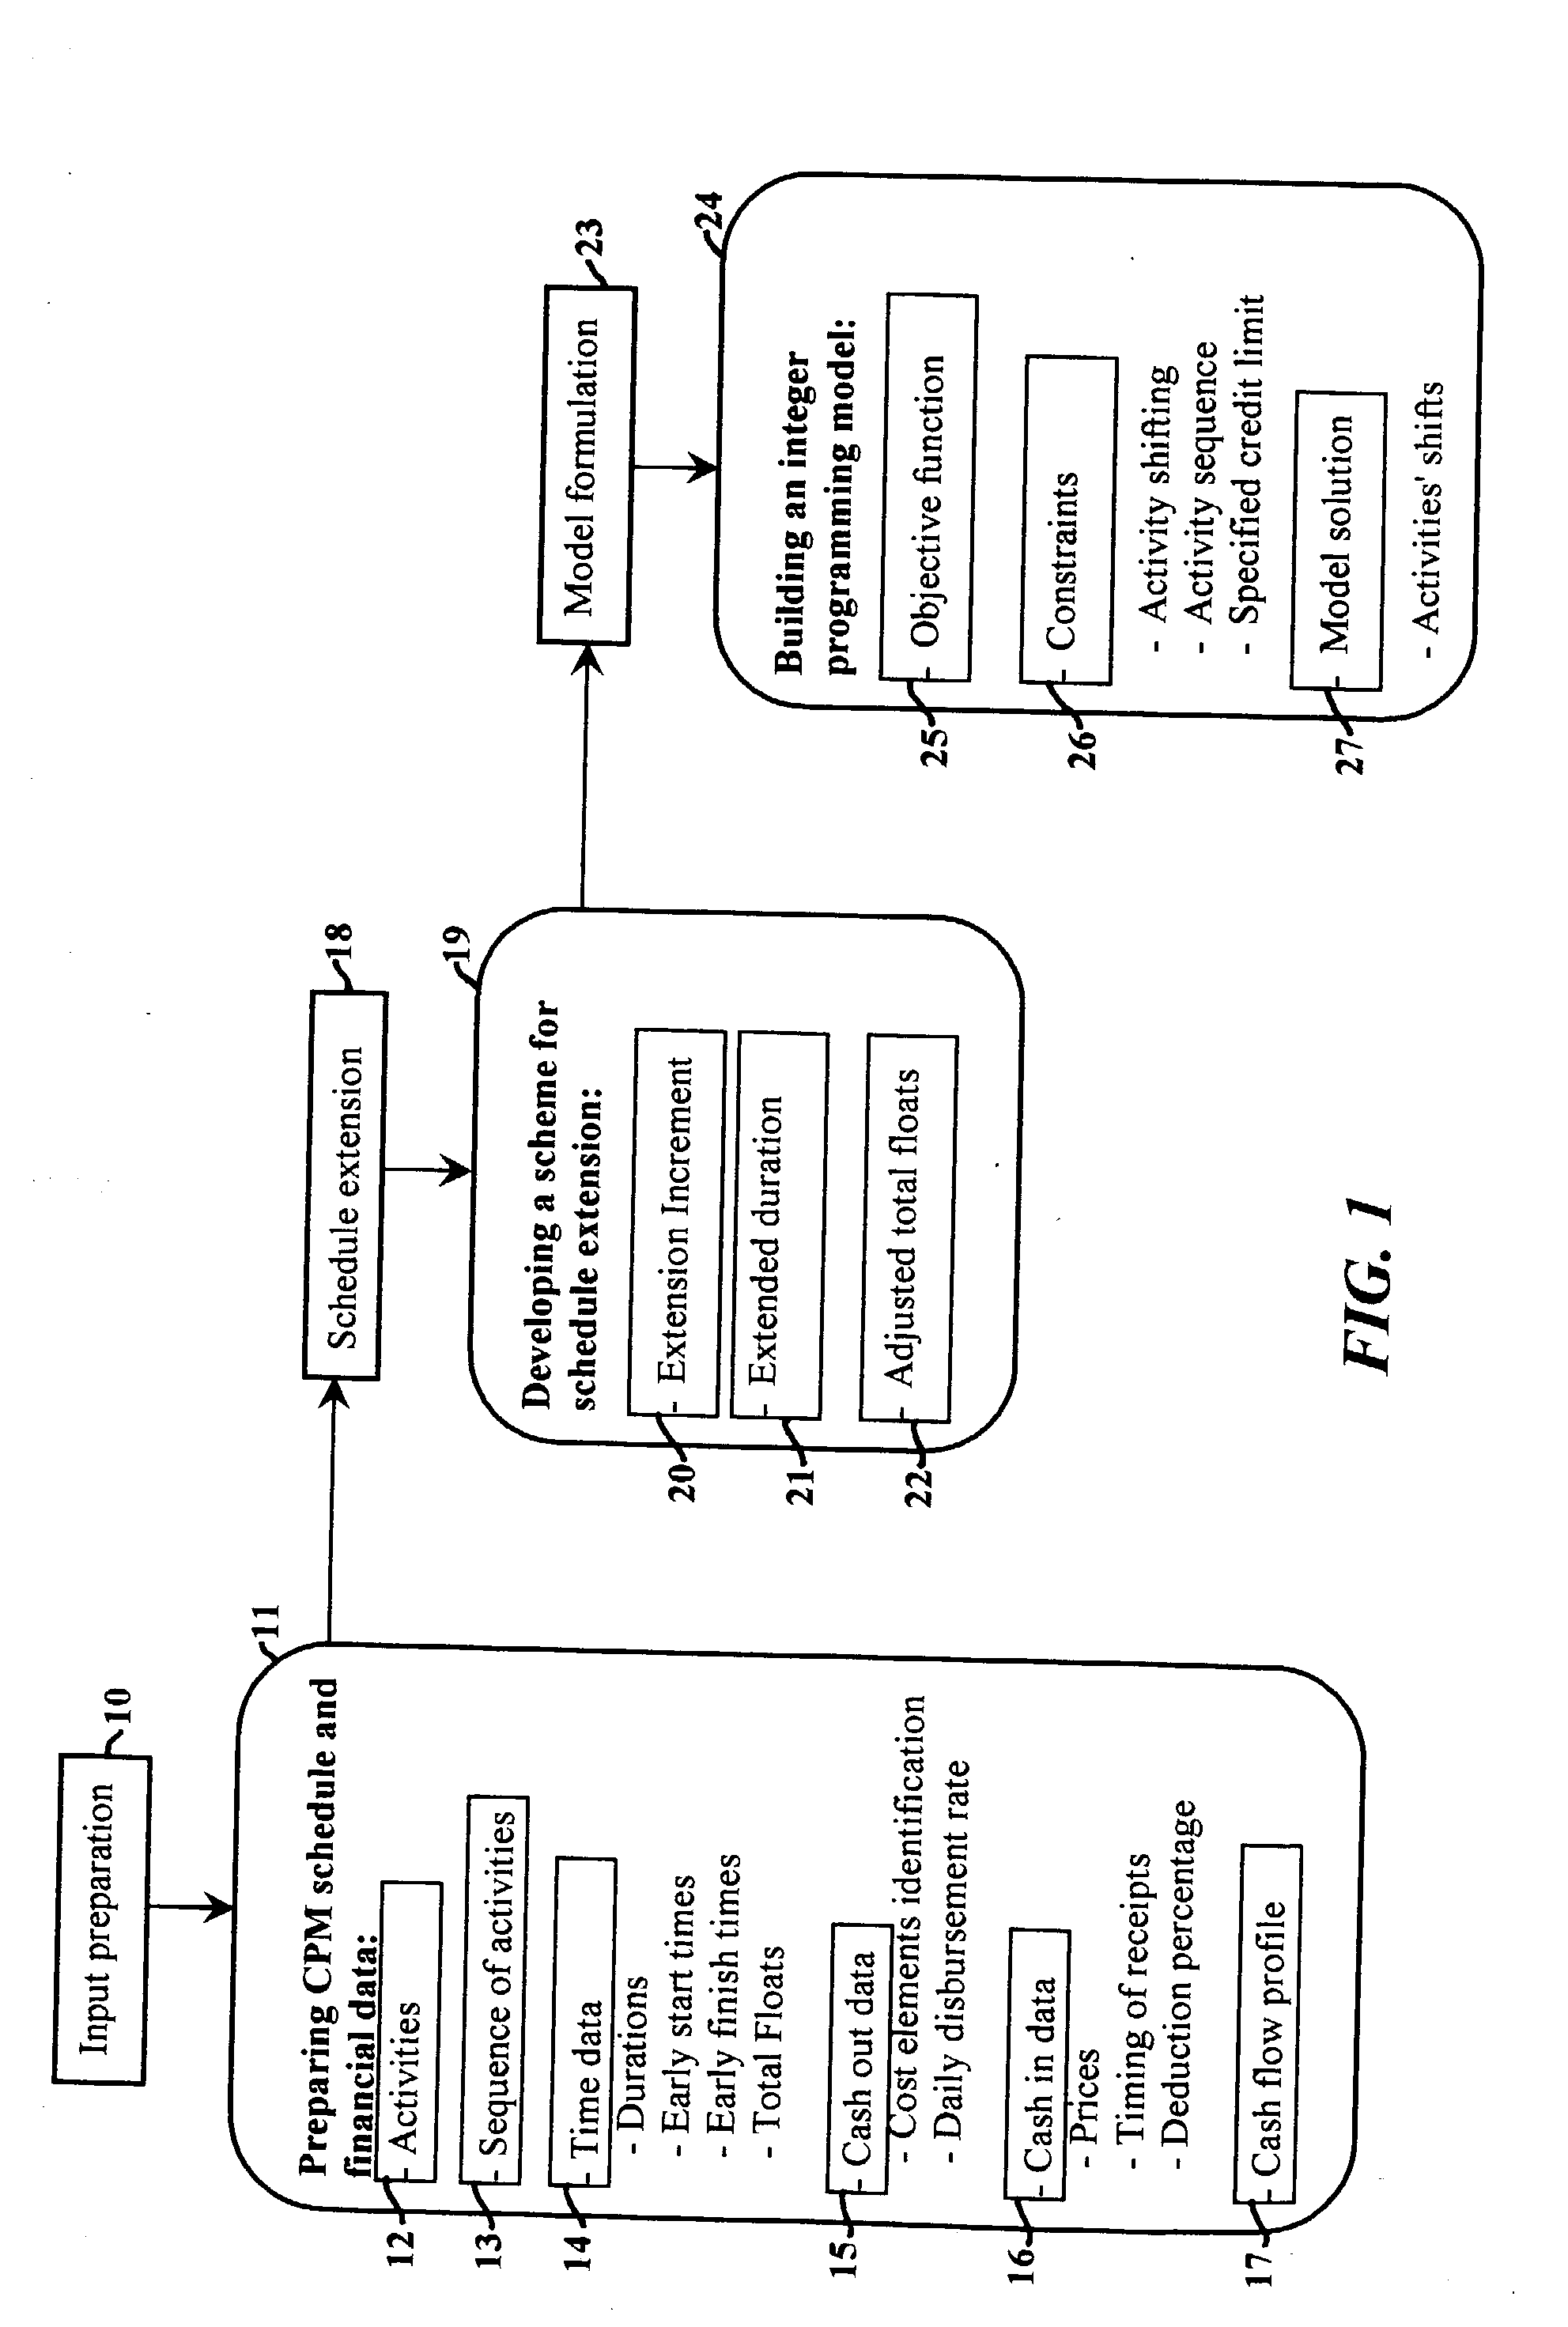 Method and apparatus for finance-based scheduling of construction projects